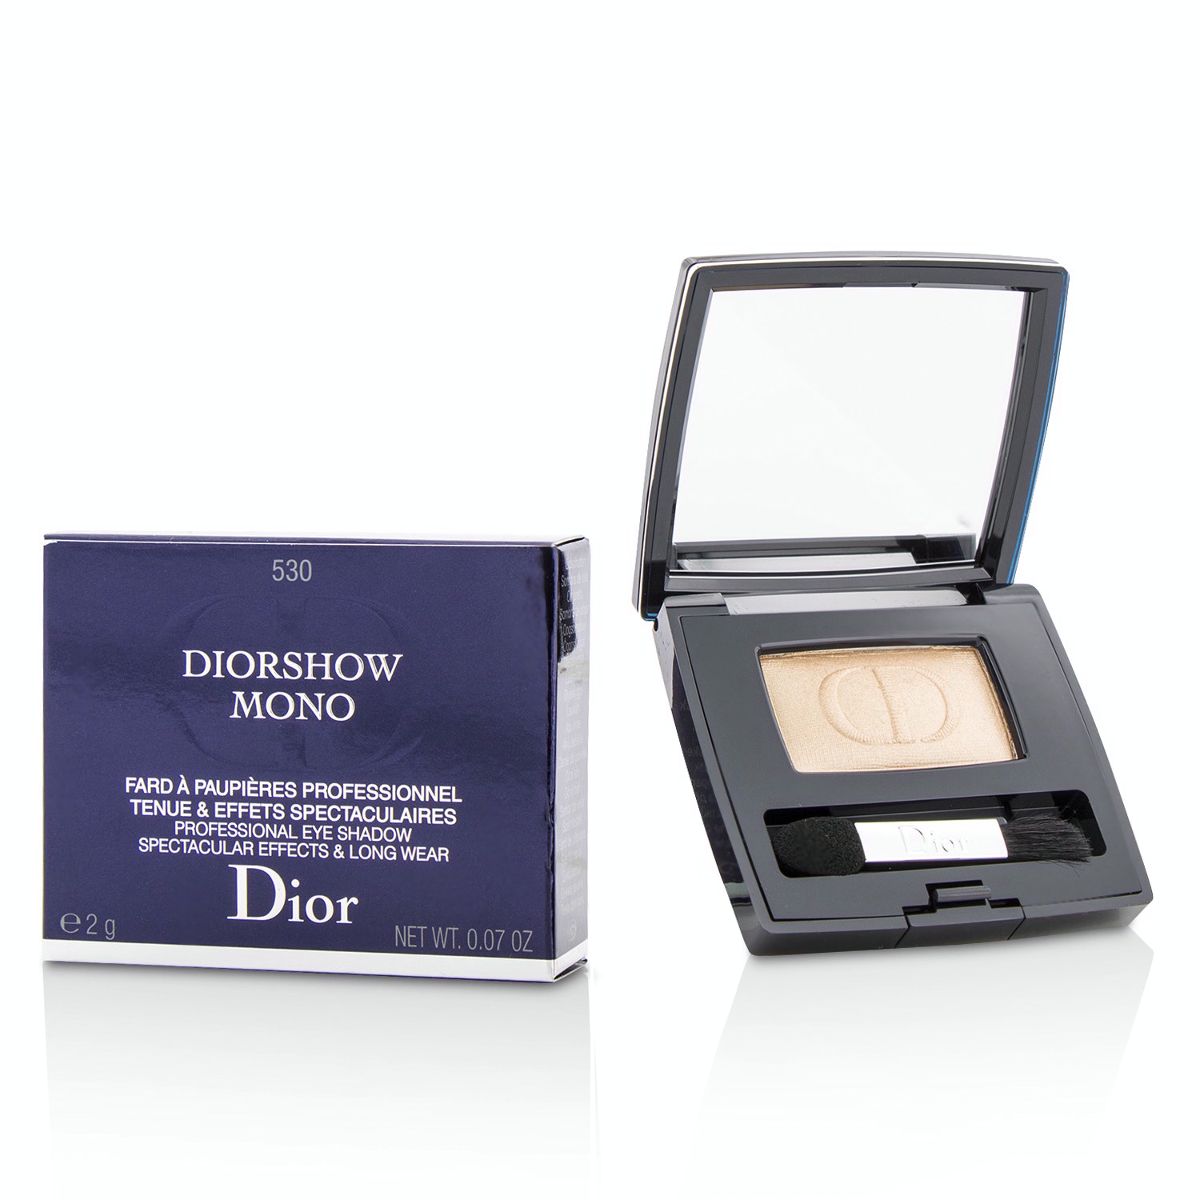 Diorshow Mono Professional Spectacular Effects  Long Wear Eyeshadow - # 530 Gallery Christian Dior Image